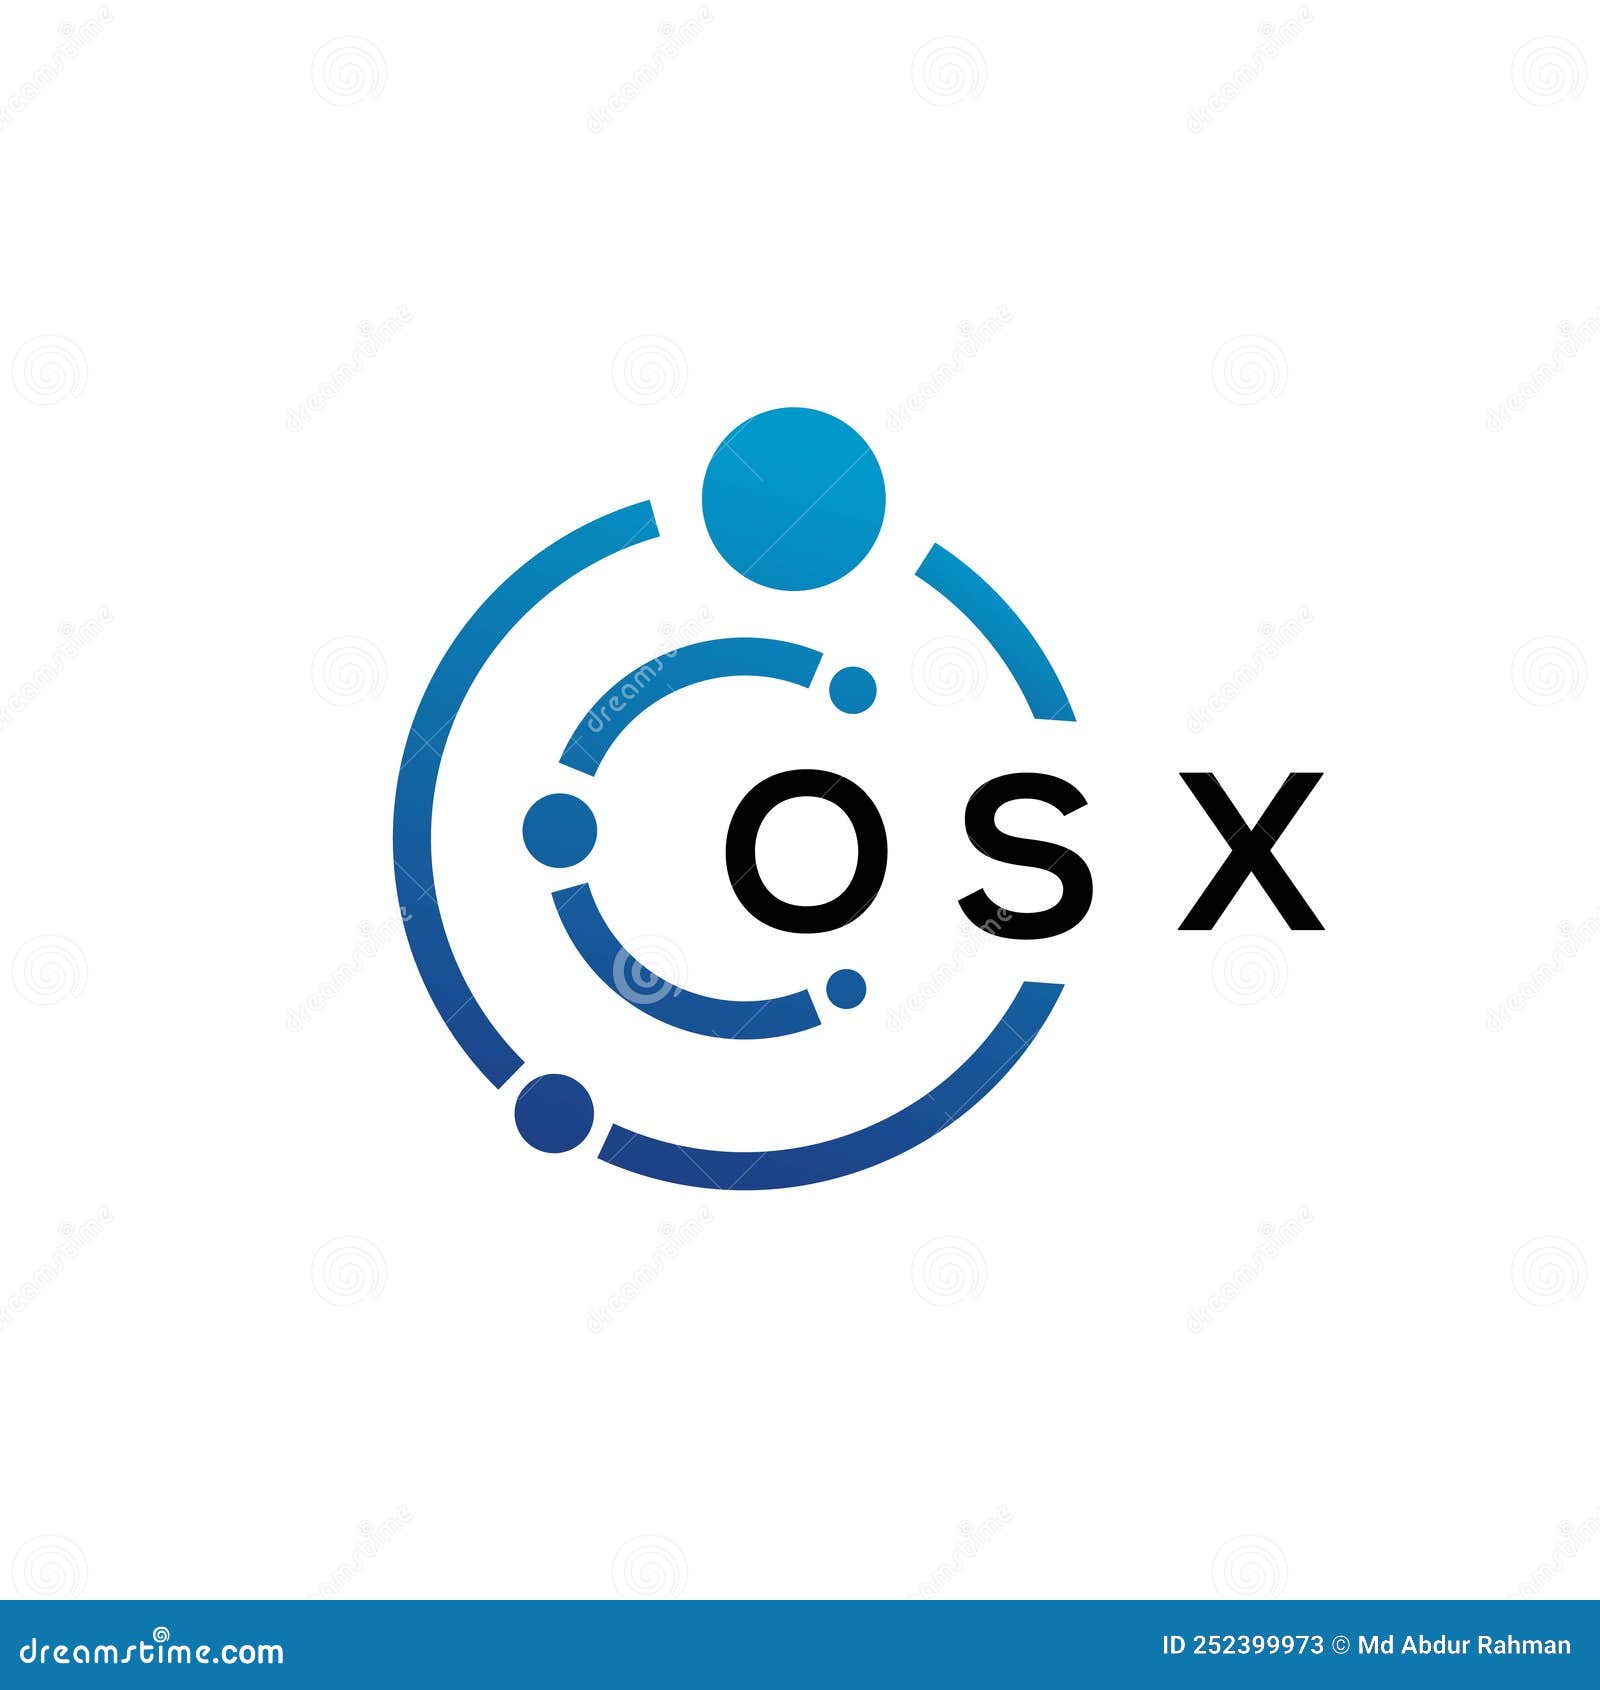 osx letter technology logo  on white background. osx creative initials letter it logo concept. osx letter 